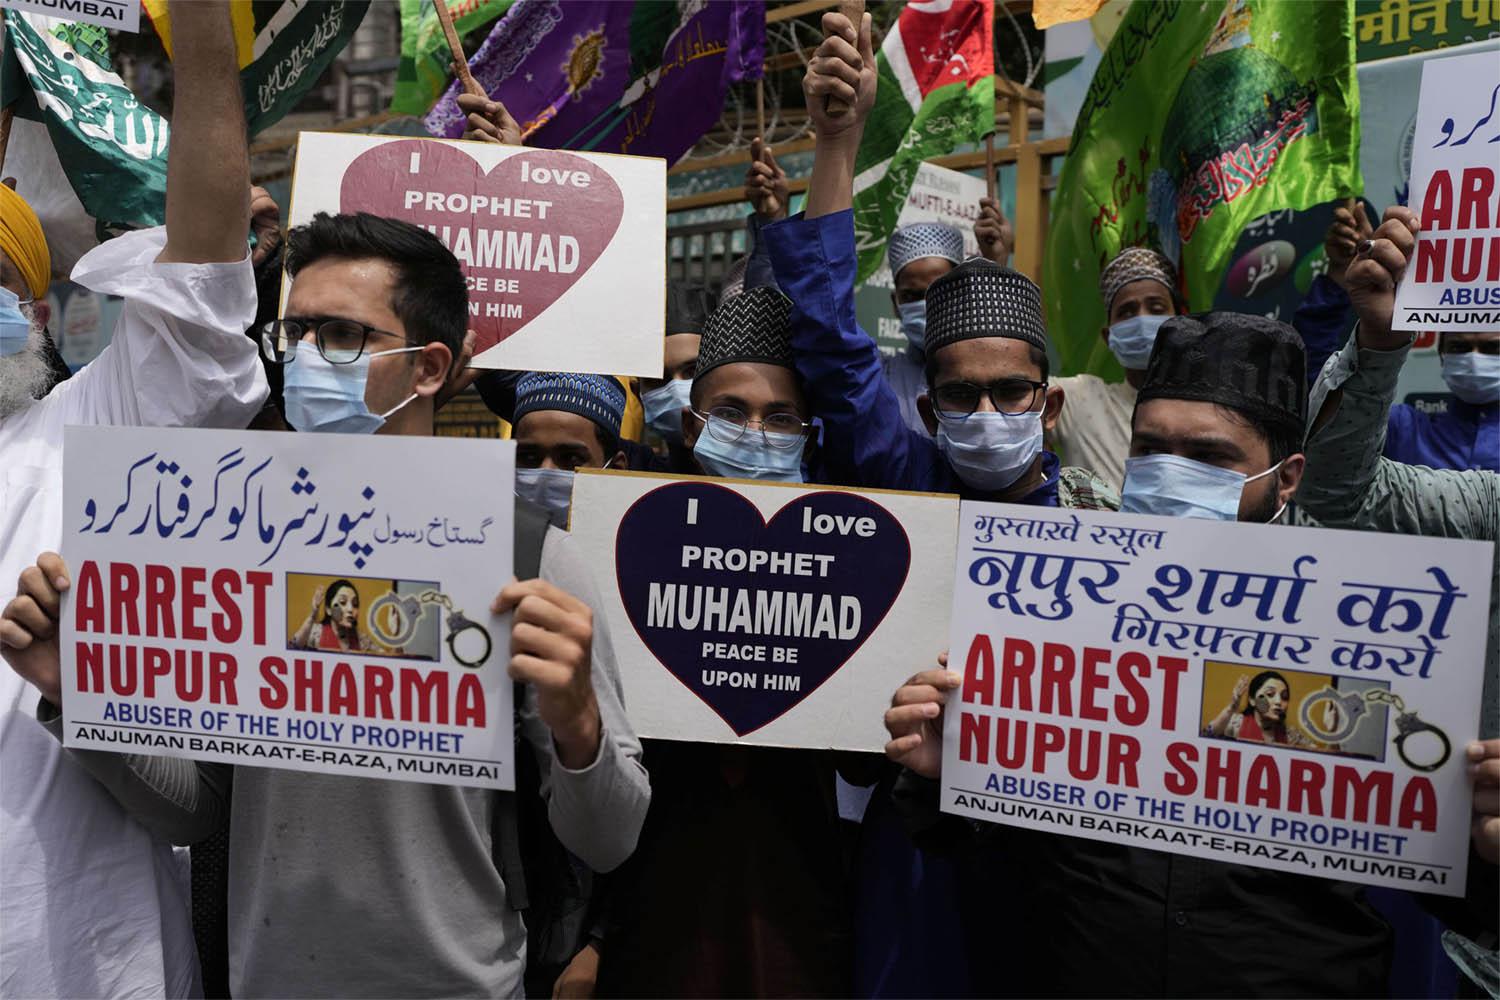 Indian Muslims hold placards demanding the arrest of Nupur Sharma